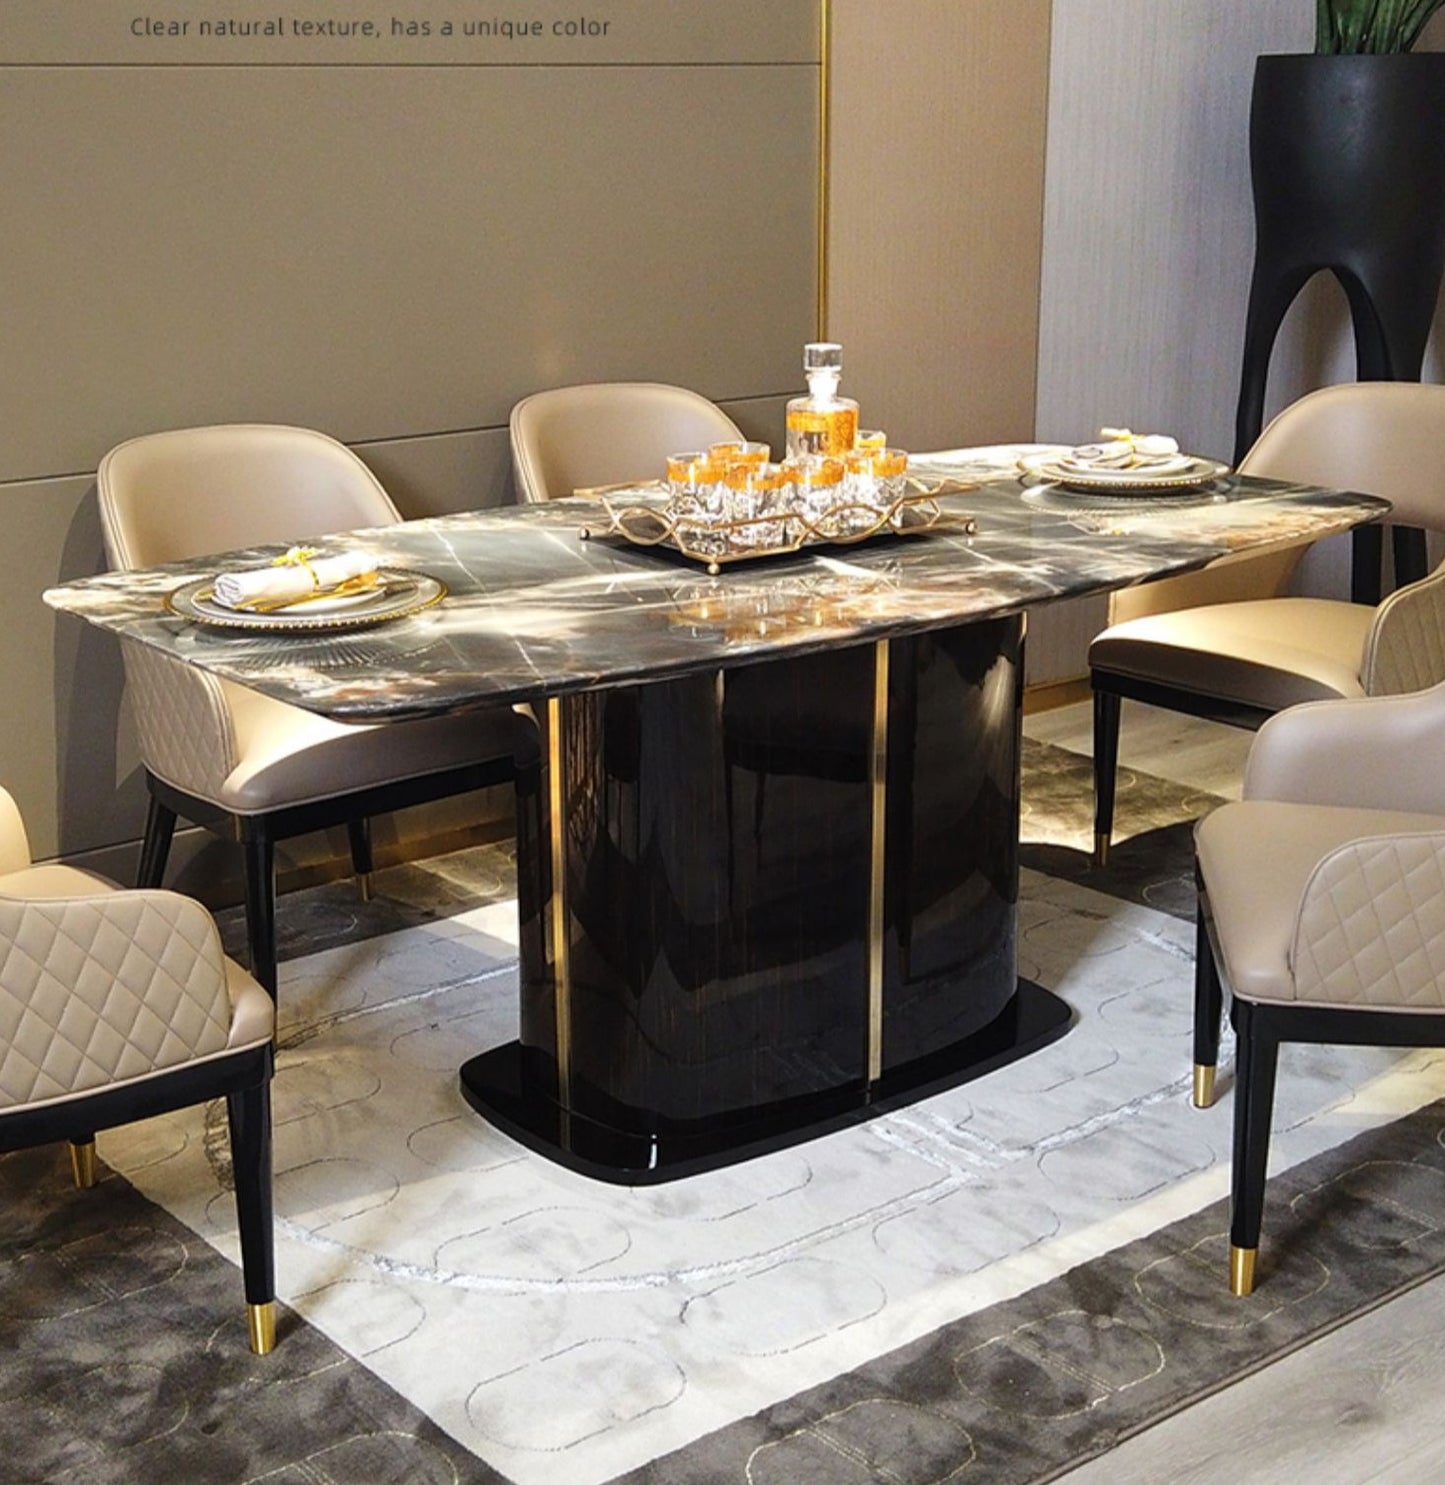 Contemporary Design Geometry Rectangle Large Dining Table in Gold with White Faux Marble Top2